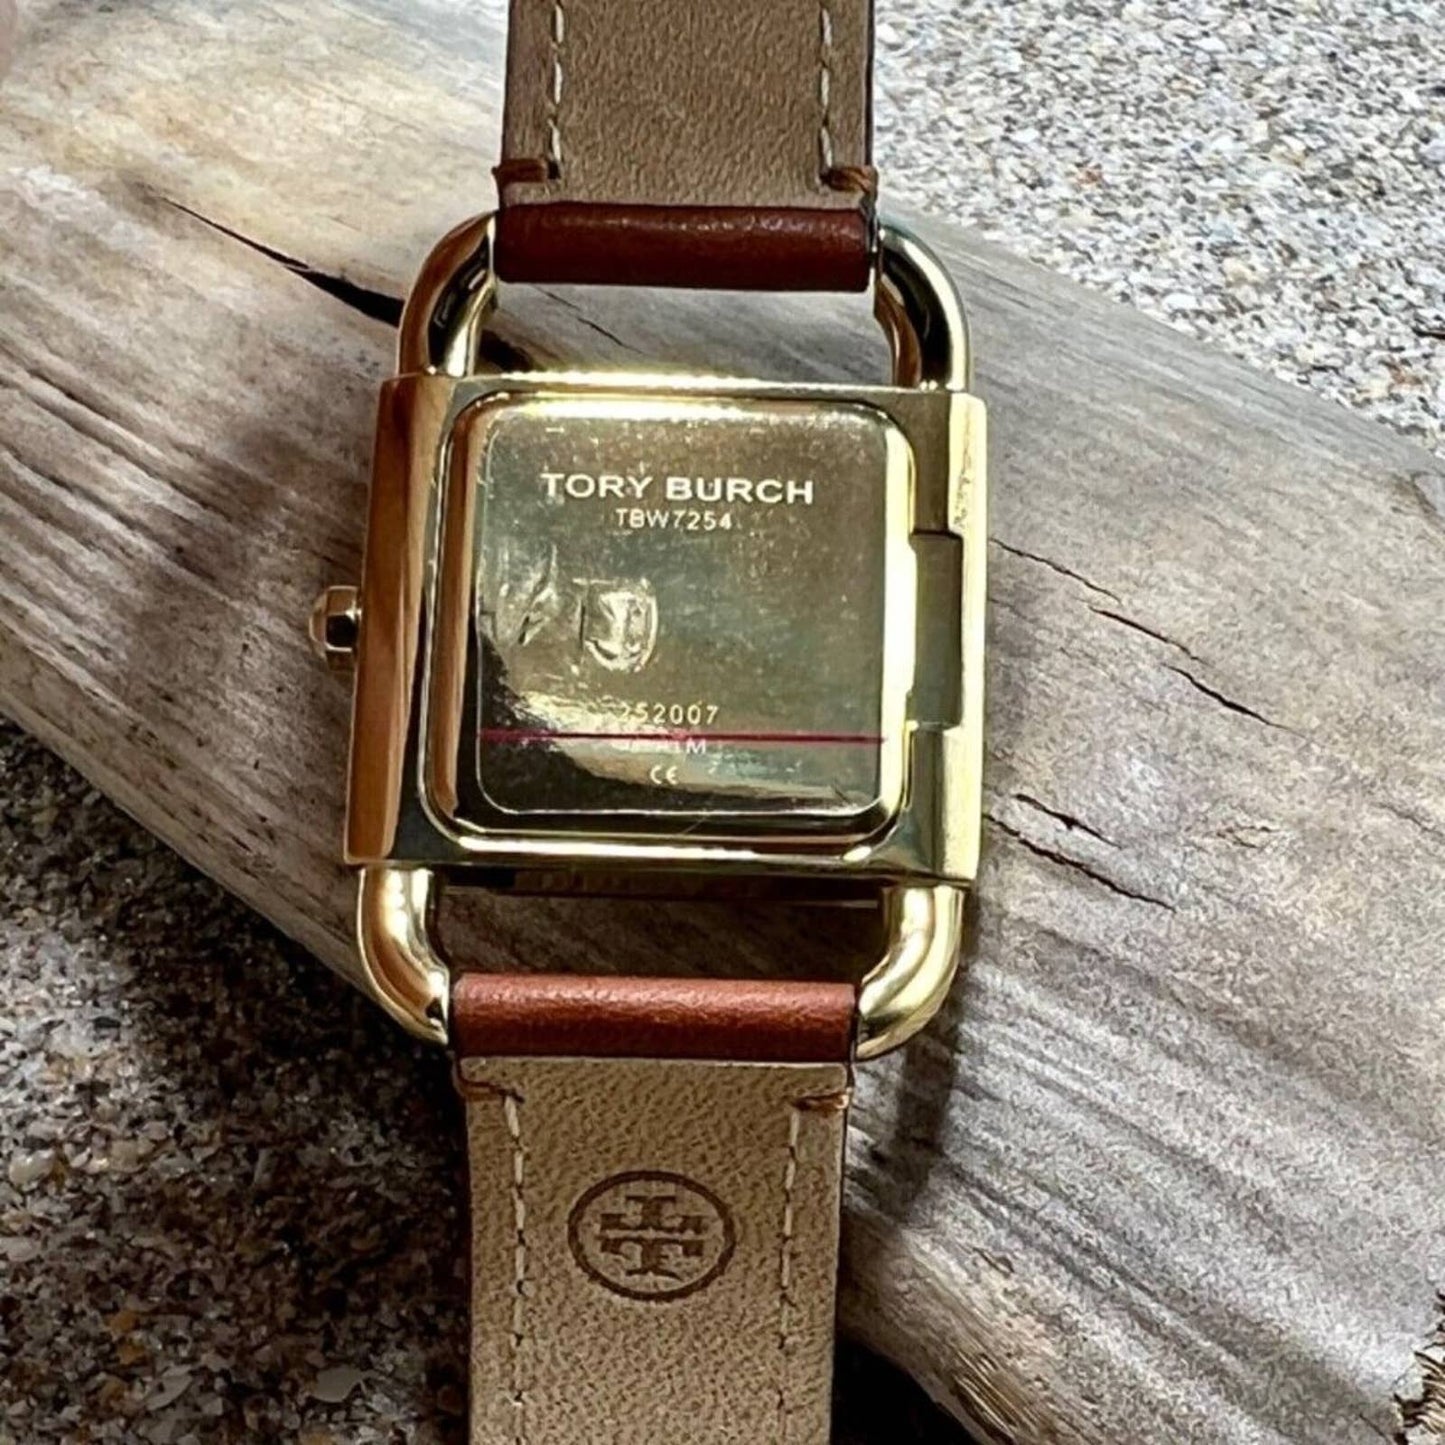 NWOT Tory Burch Phipps Brown Leather Strap Watch TBW7254 24mm